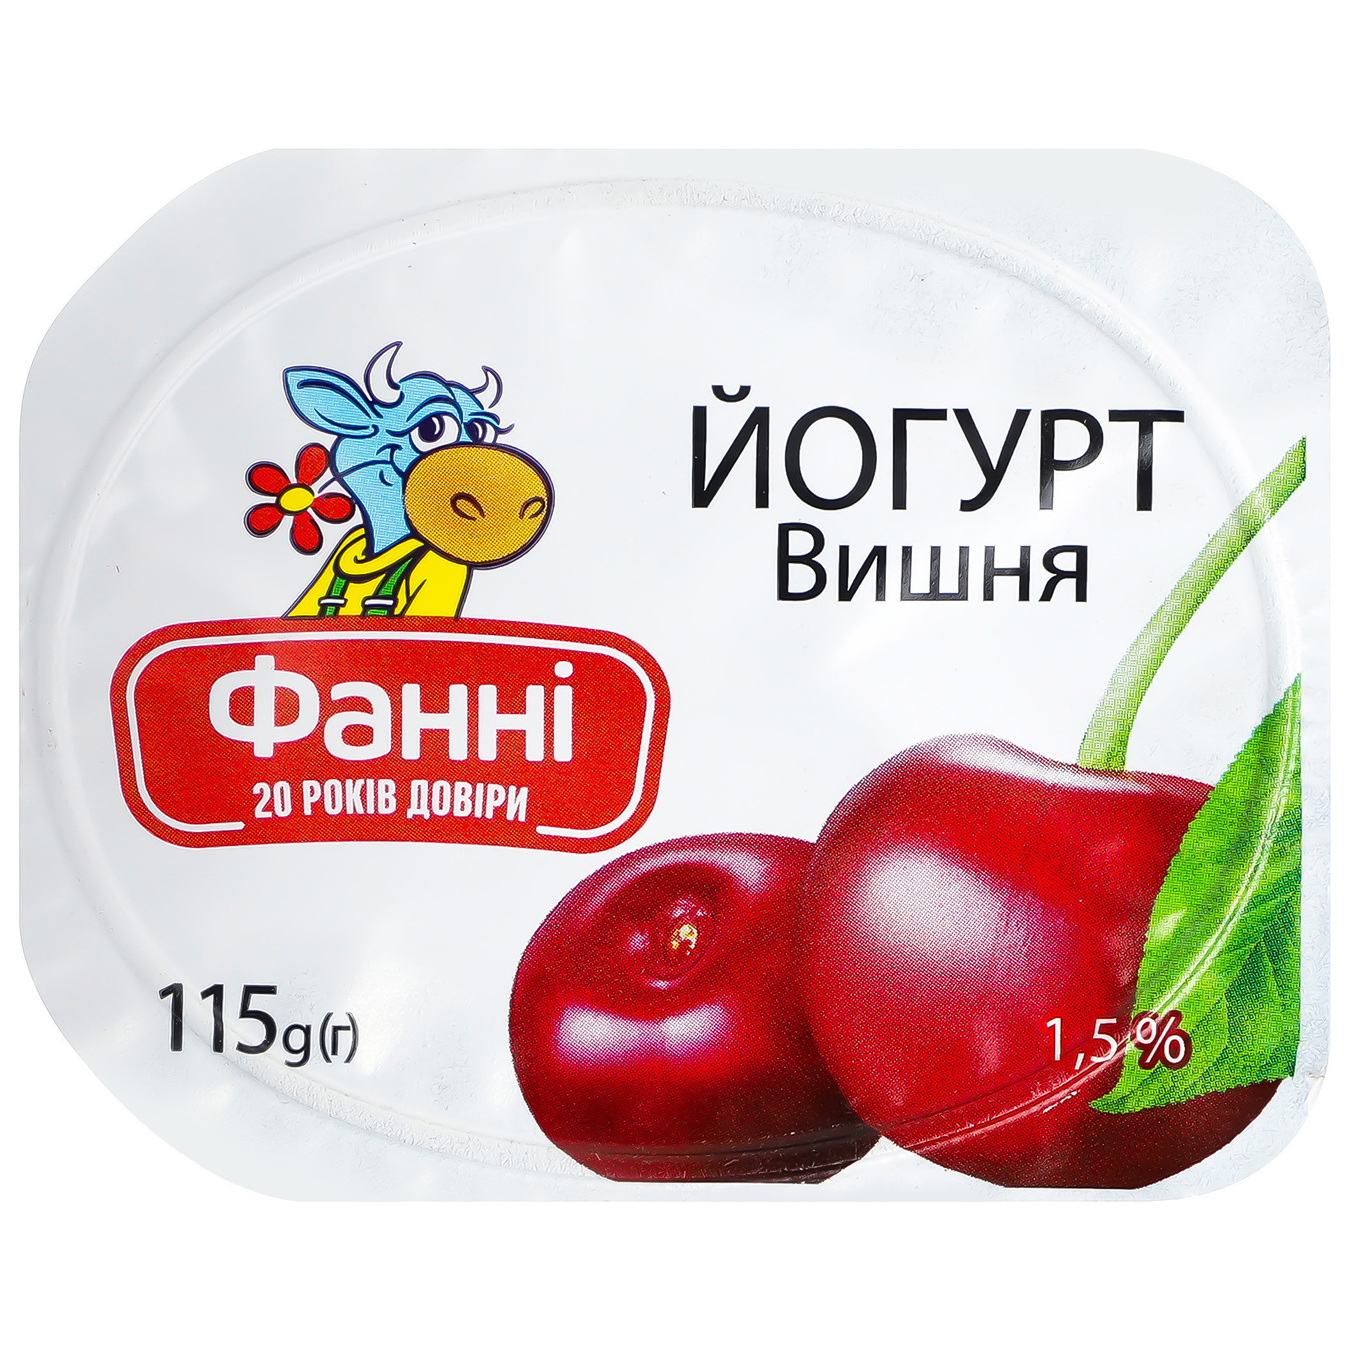 Fanny yogurt with cherry filling cup 1.5% 115g 6